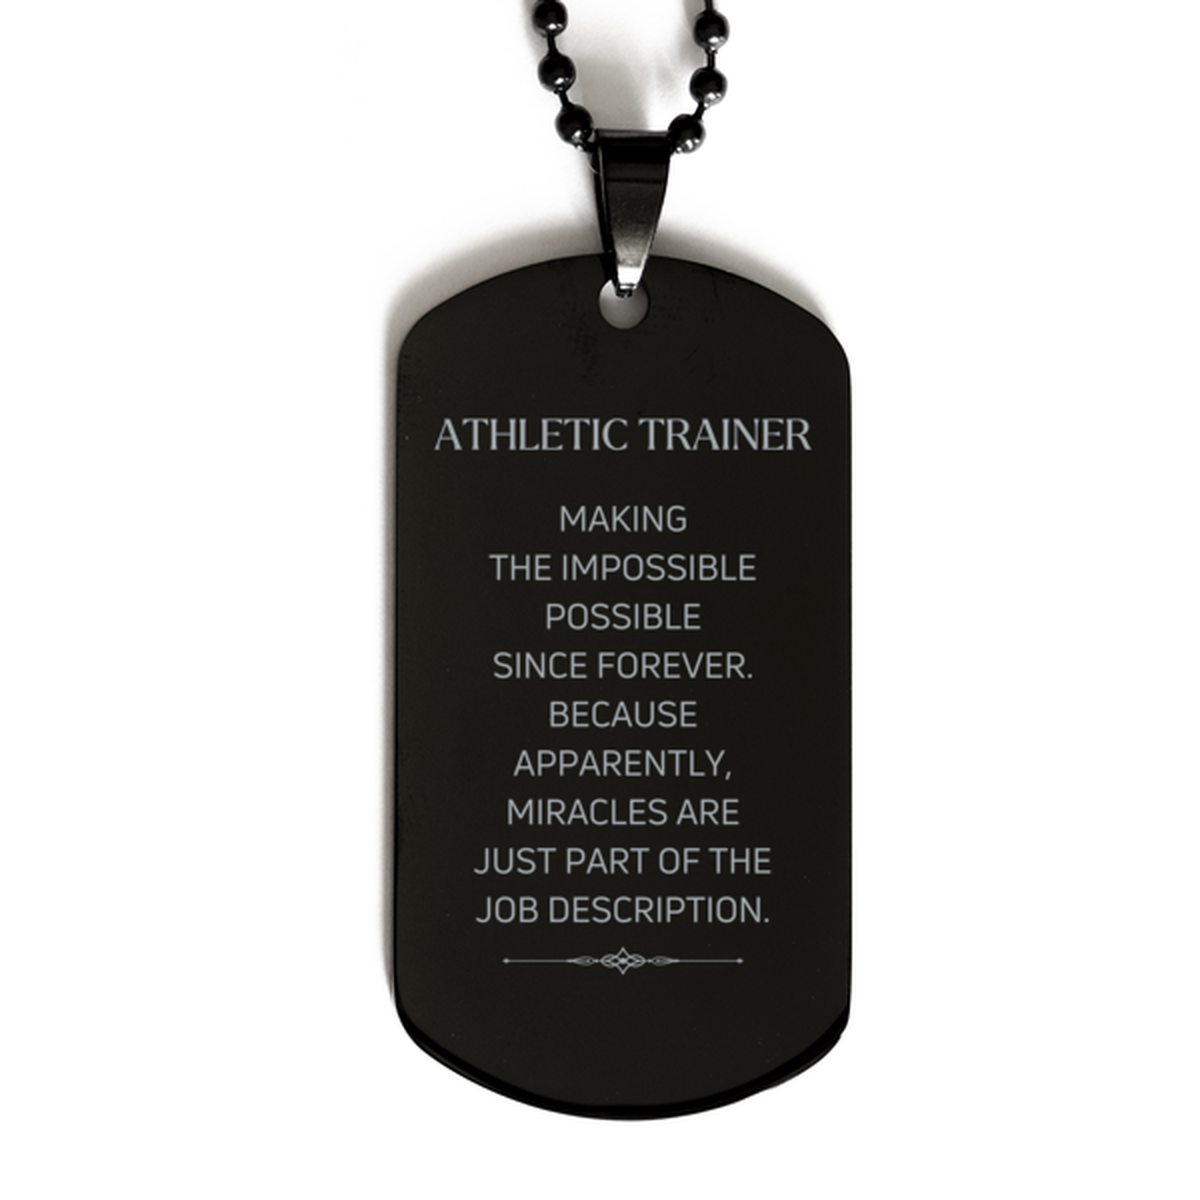 Funny Athletic Trainer Gifts, Miracles are just part of the job description, Inspirational Birthday Black Dog Tag For Athletic Trainer, Men, Women, Coworkers, Friends, Boss